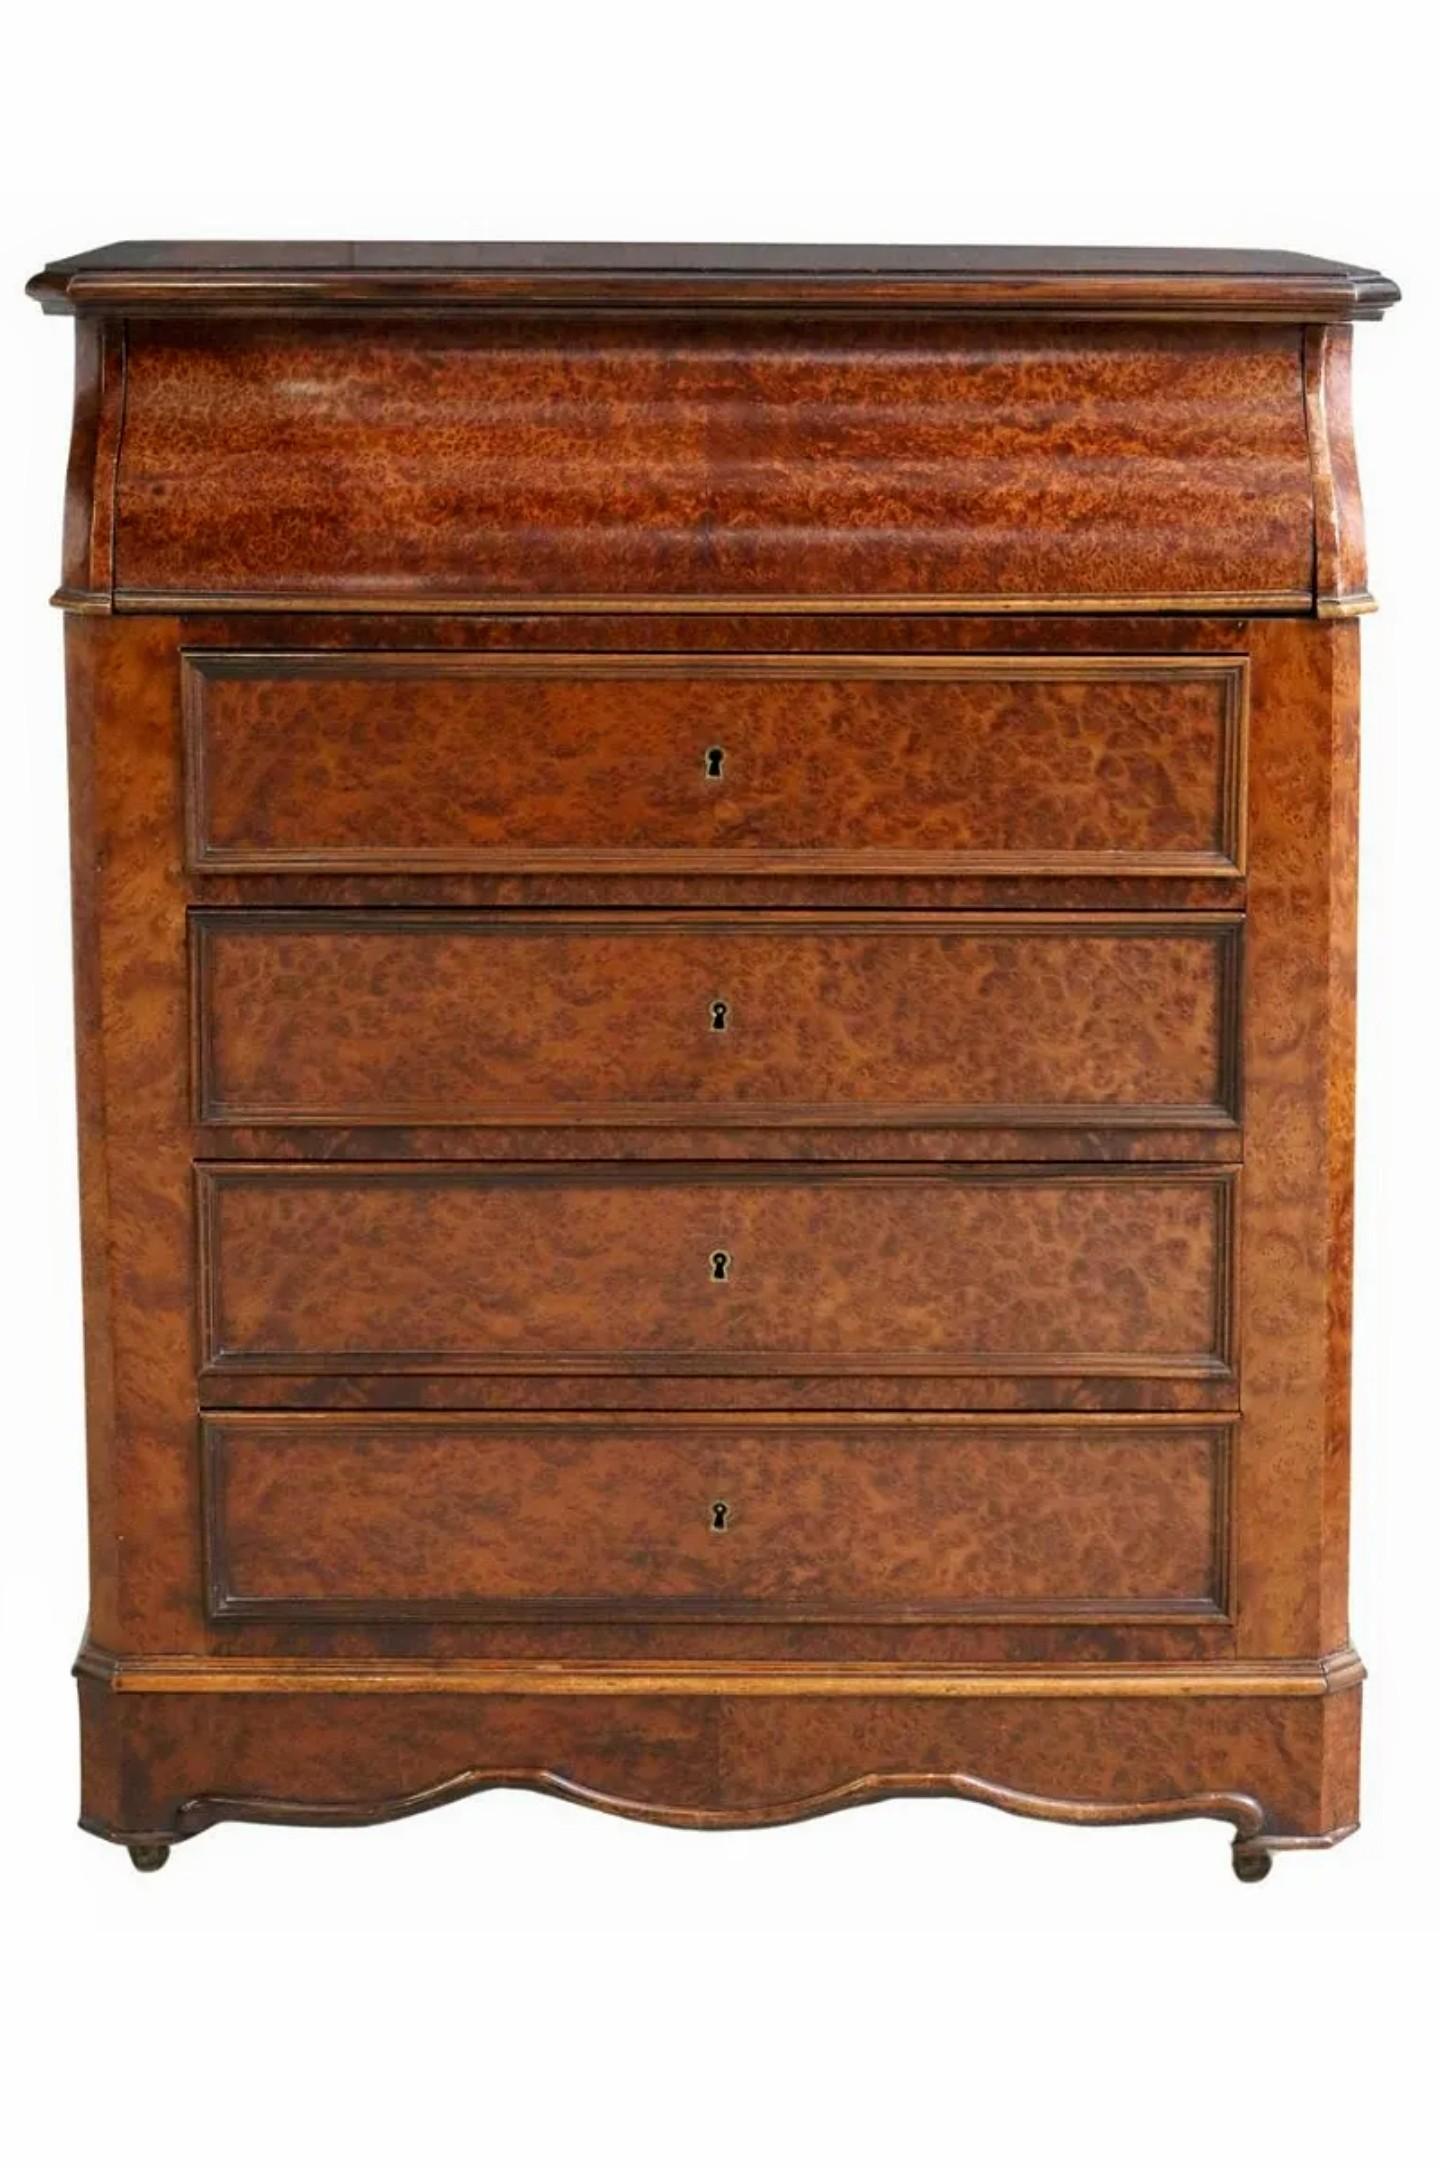 Add sophisticated antique character, elegant warmth, and rich historical depth to any space with this scarce period Louis Philippe (1830-1848) wash stand in stunning exotic burled amboyna. 

Hand-crafted in France in the mid 19th century, most